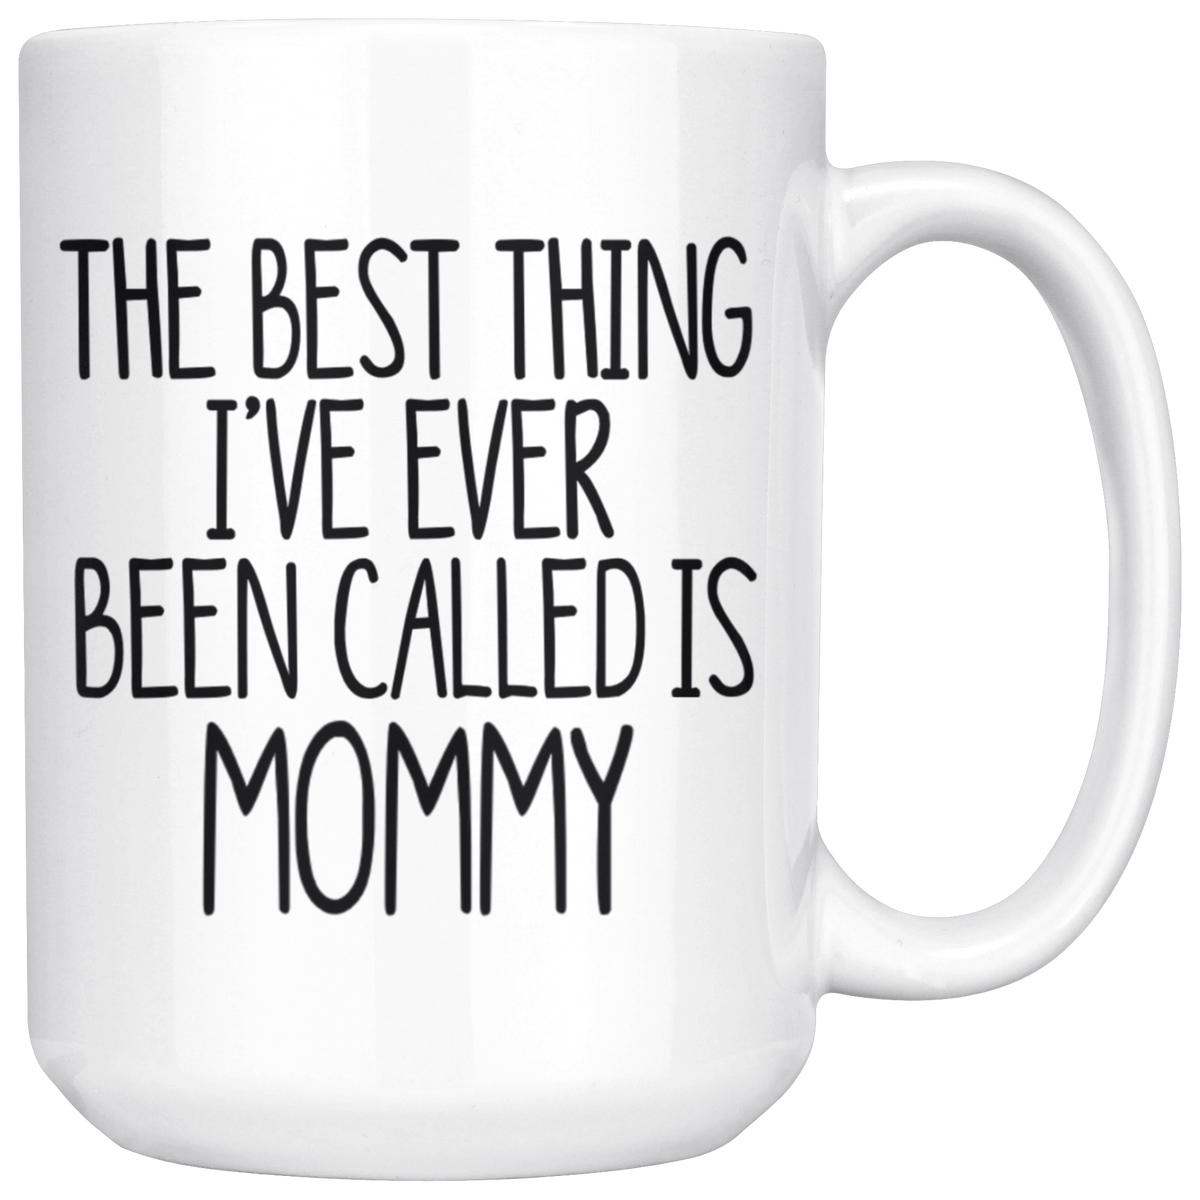 Mommy Gift Mug The Best Thing I've Ever Been Called is Mommy